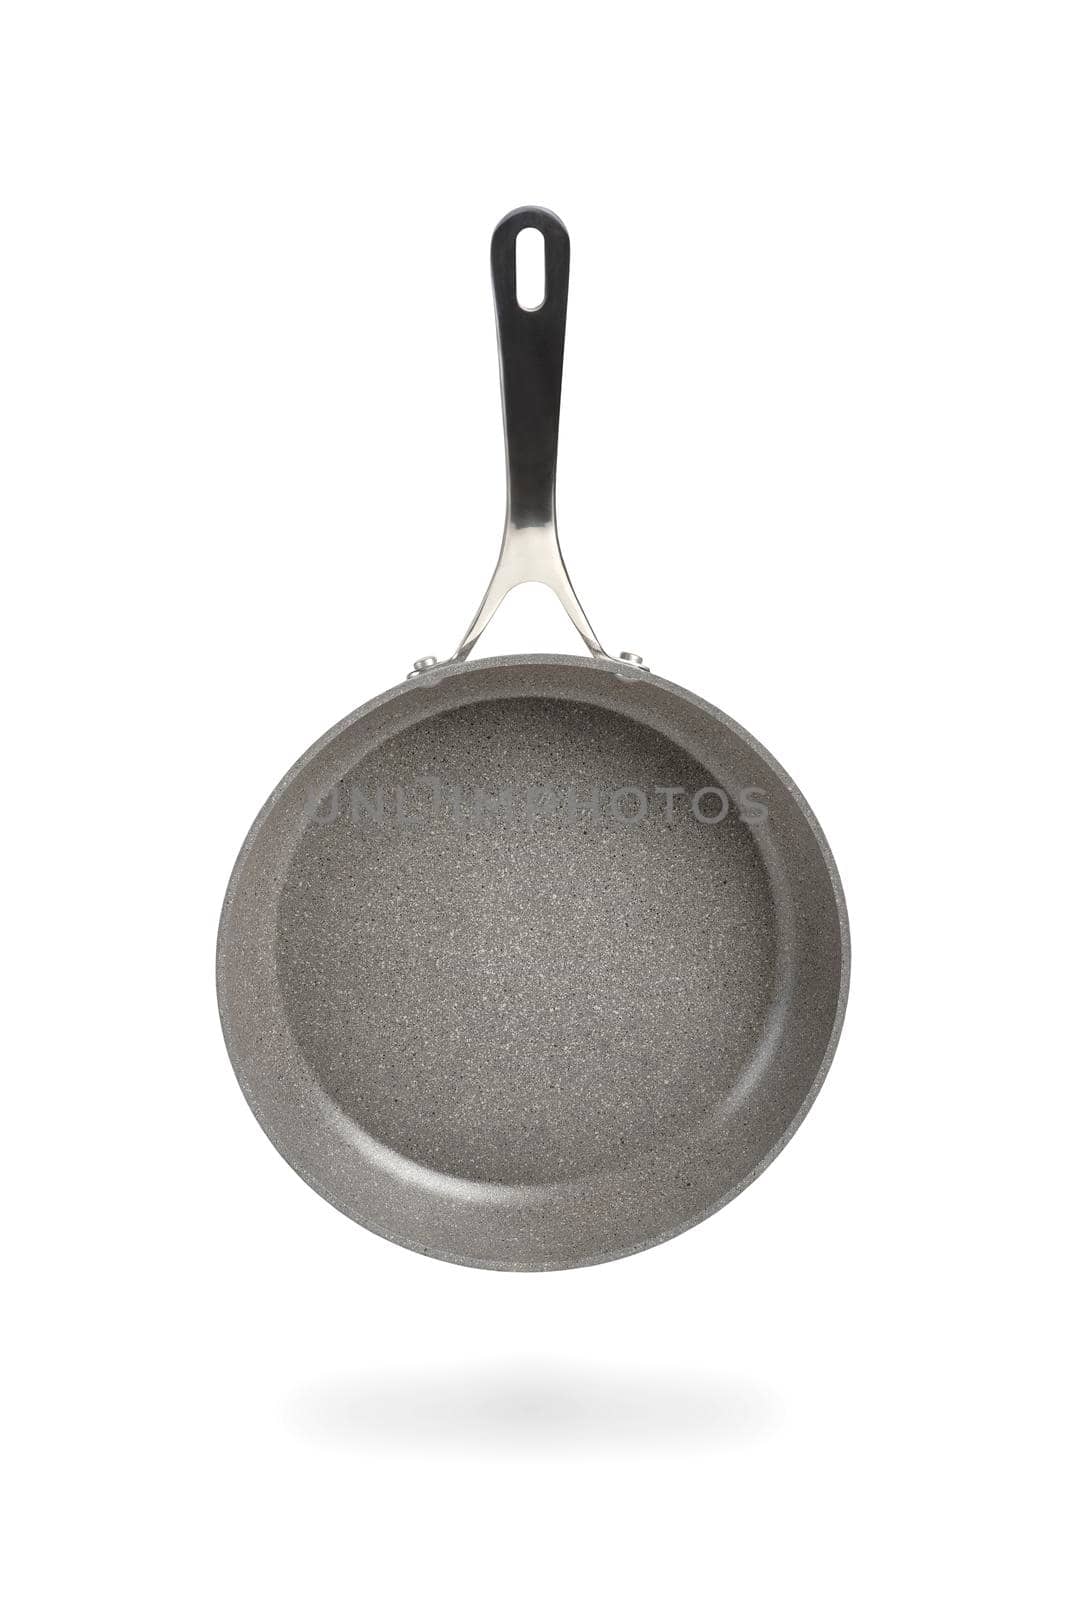 Black frying pan isolated on white background. Frying pan with non-stick coating.Non-stick frying pan made of titanium and granite. Isolate with shadow by SERSOL